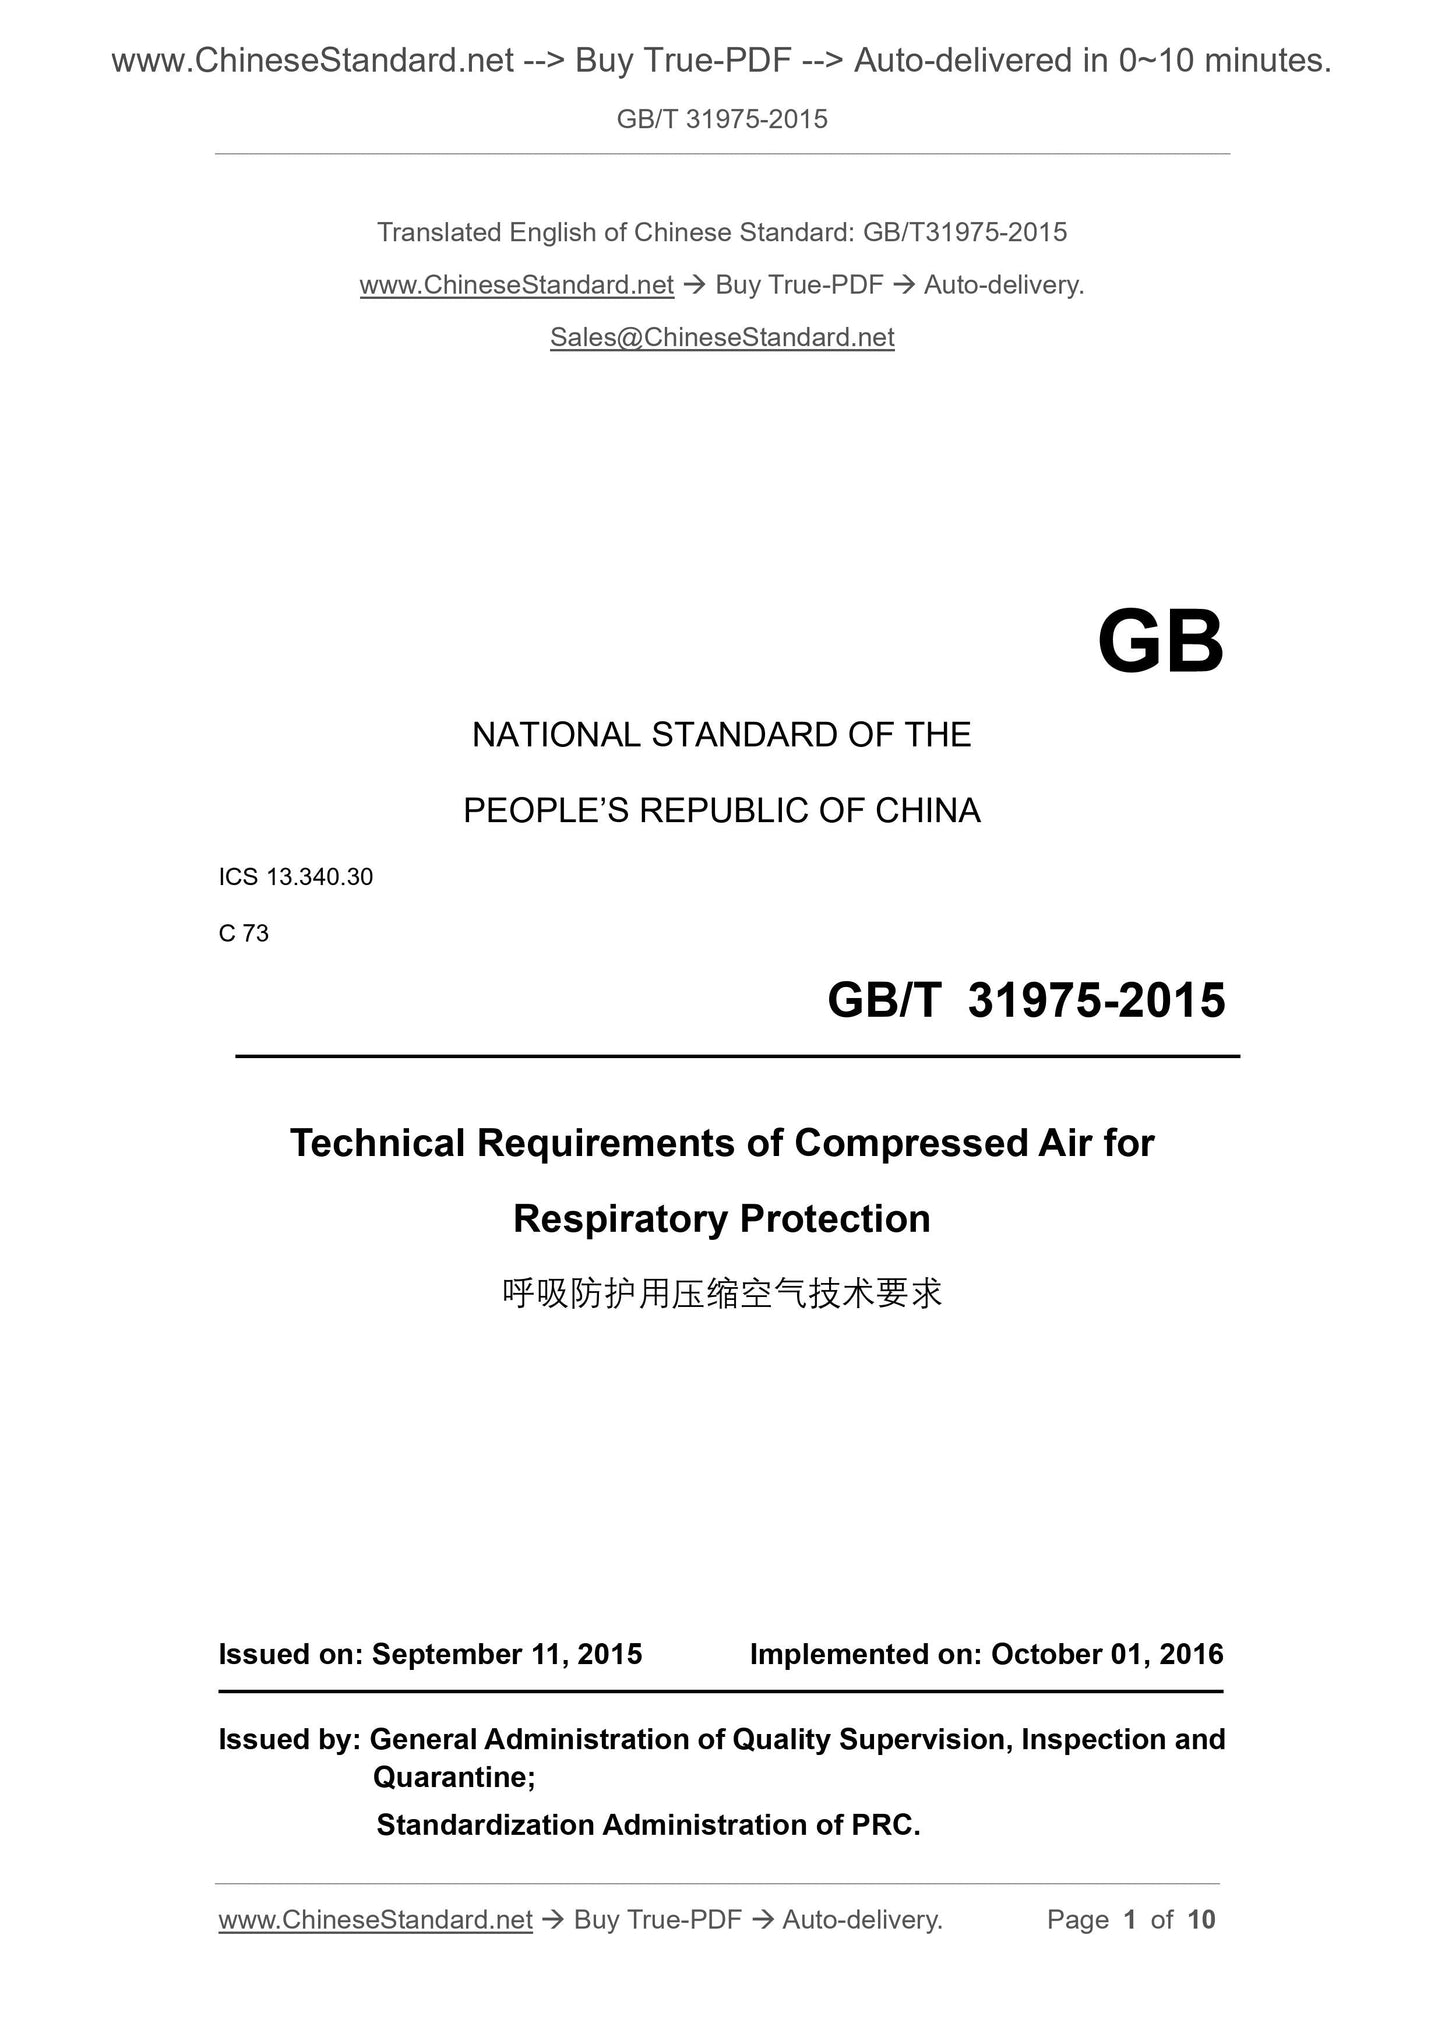 GB/T 31975-2015 Page 1